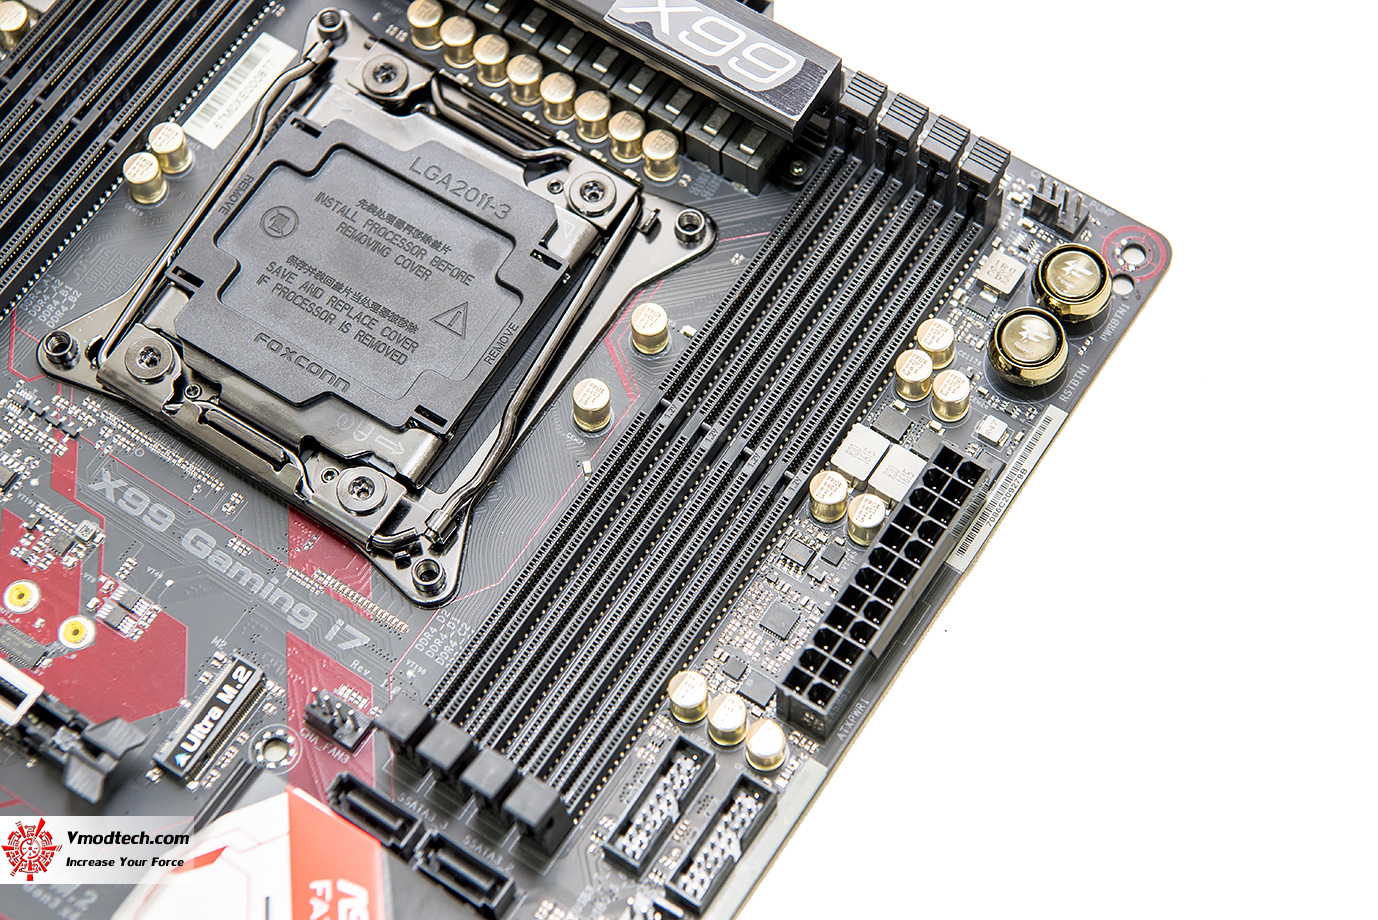 dsc 1966 ASRock Fatal1ty X99 Professional Gaming i7 Motherboard Review